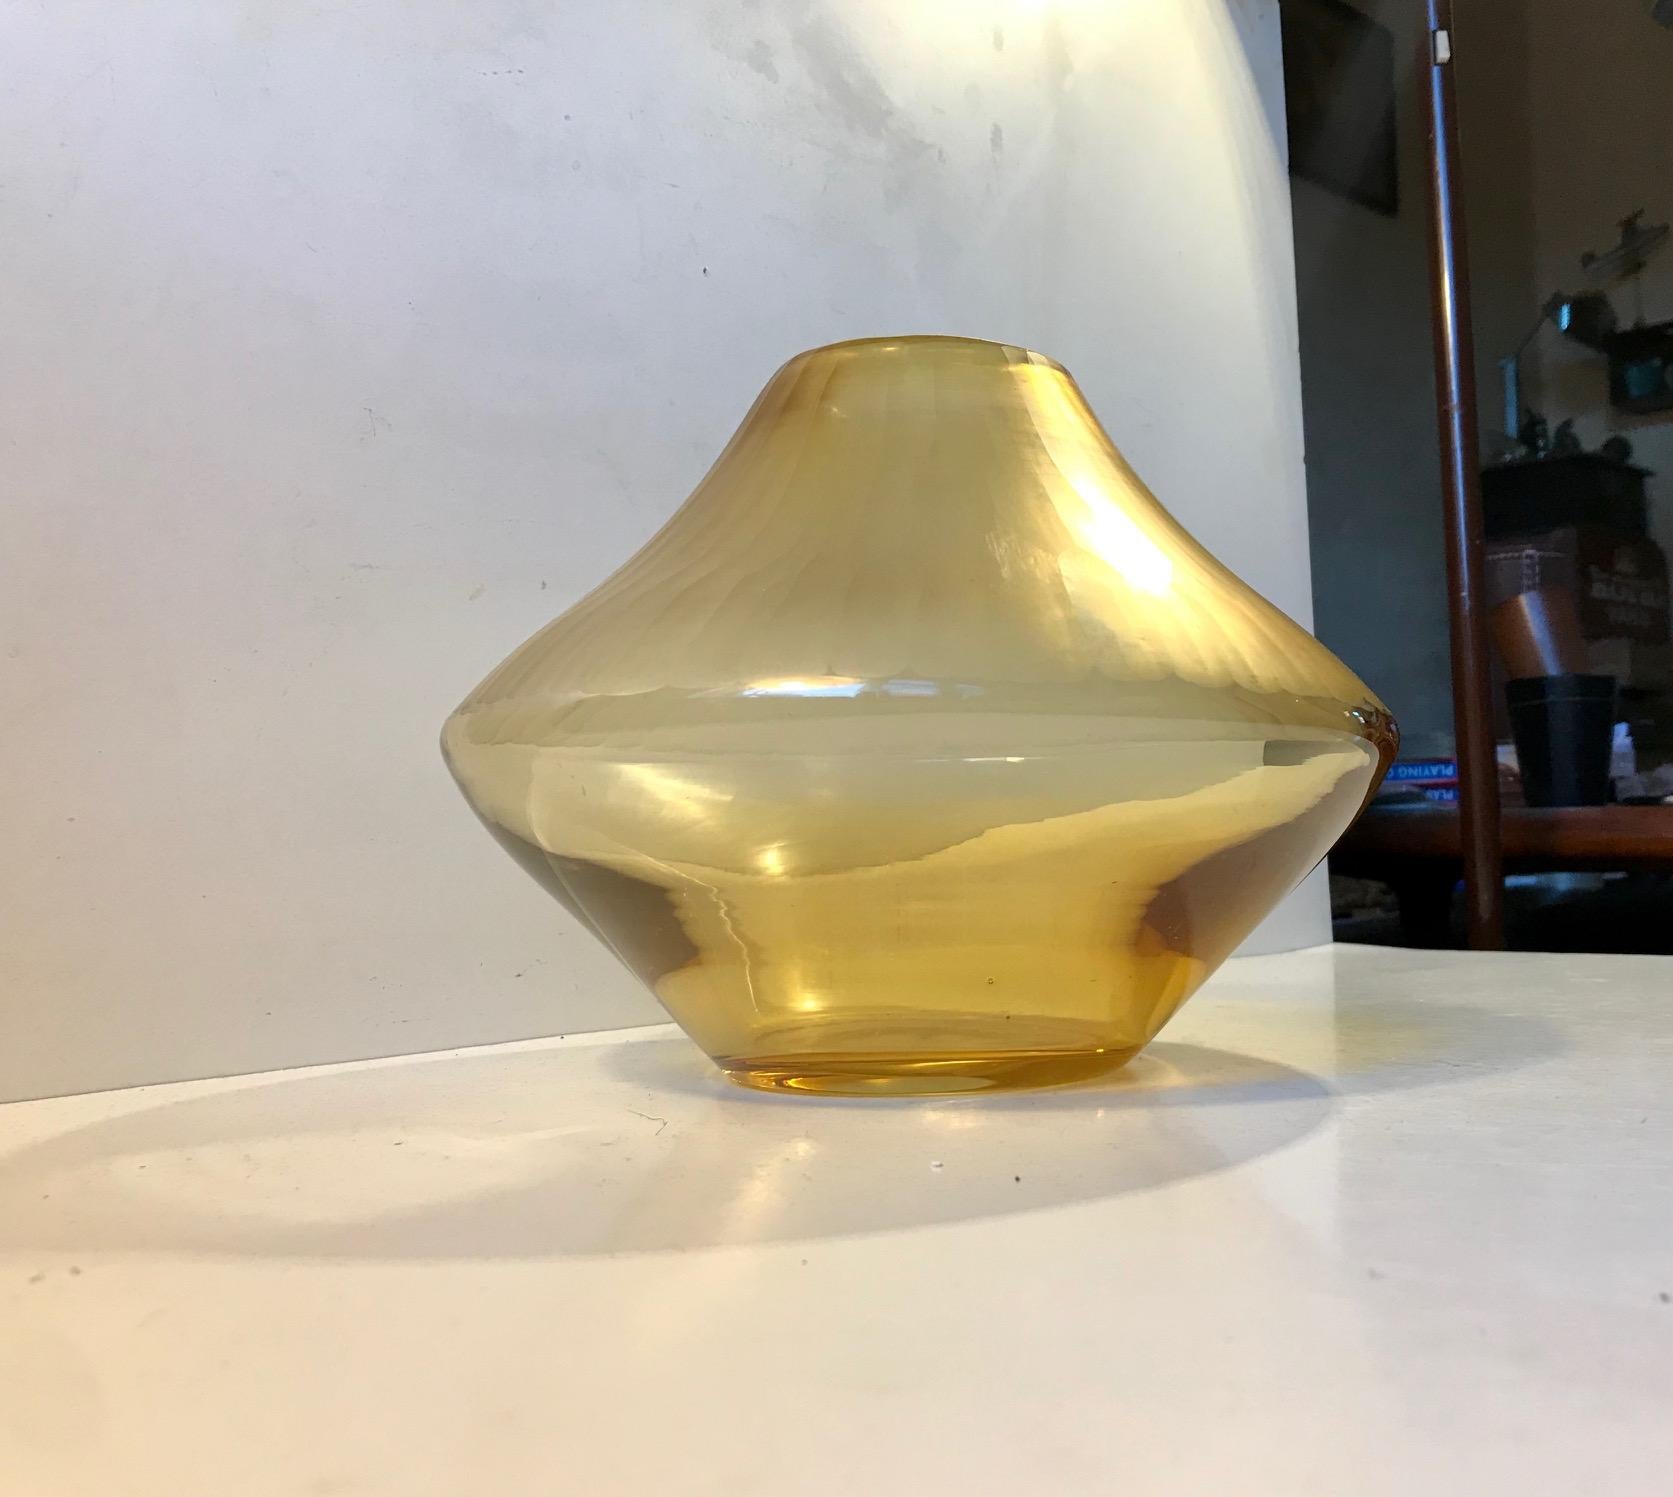 Large and wide hand blown Amber glass vase. The top of the vase frosted. A cutting and sanding technique that leaves the surface of the glass like Satin despite the texture. This vase was made at Kosta Boda in Sweden during the 1970s. It is possibly